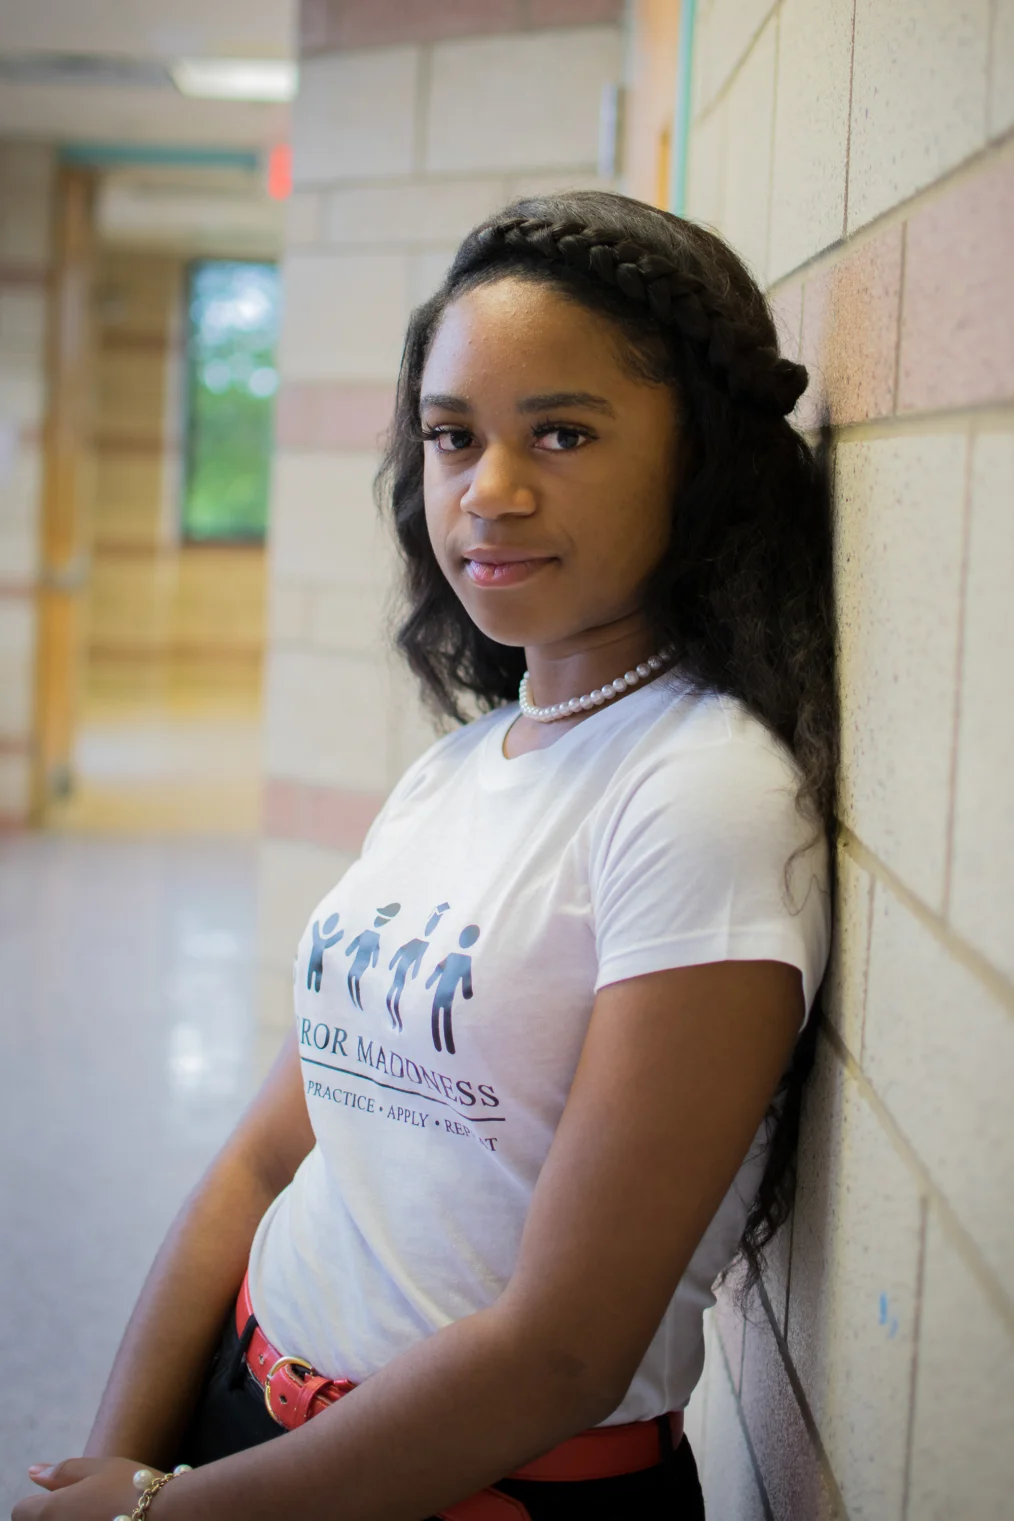 A medium skin toned Black woman is leaning to the right against a wall smiling with her mouth closed. She has long dark hair with a braid in the front and is wearing a white T-shirt, red belt and a pearl necklace. Her arms are crossed in front of her; the background appears to be a hallway. 